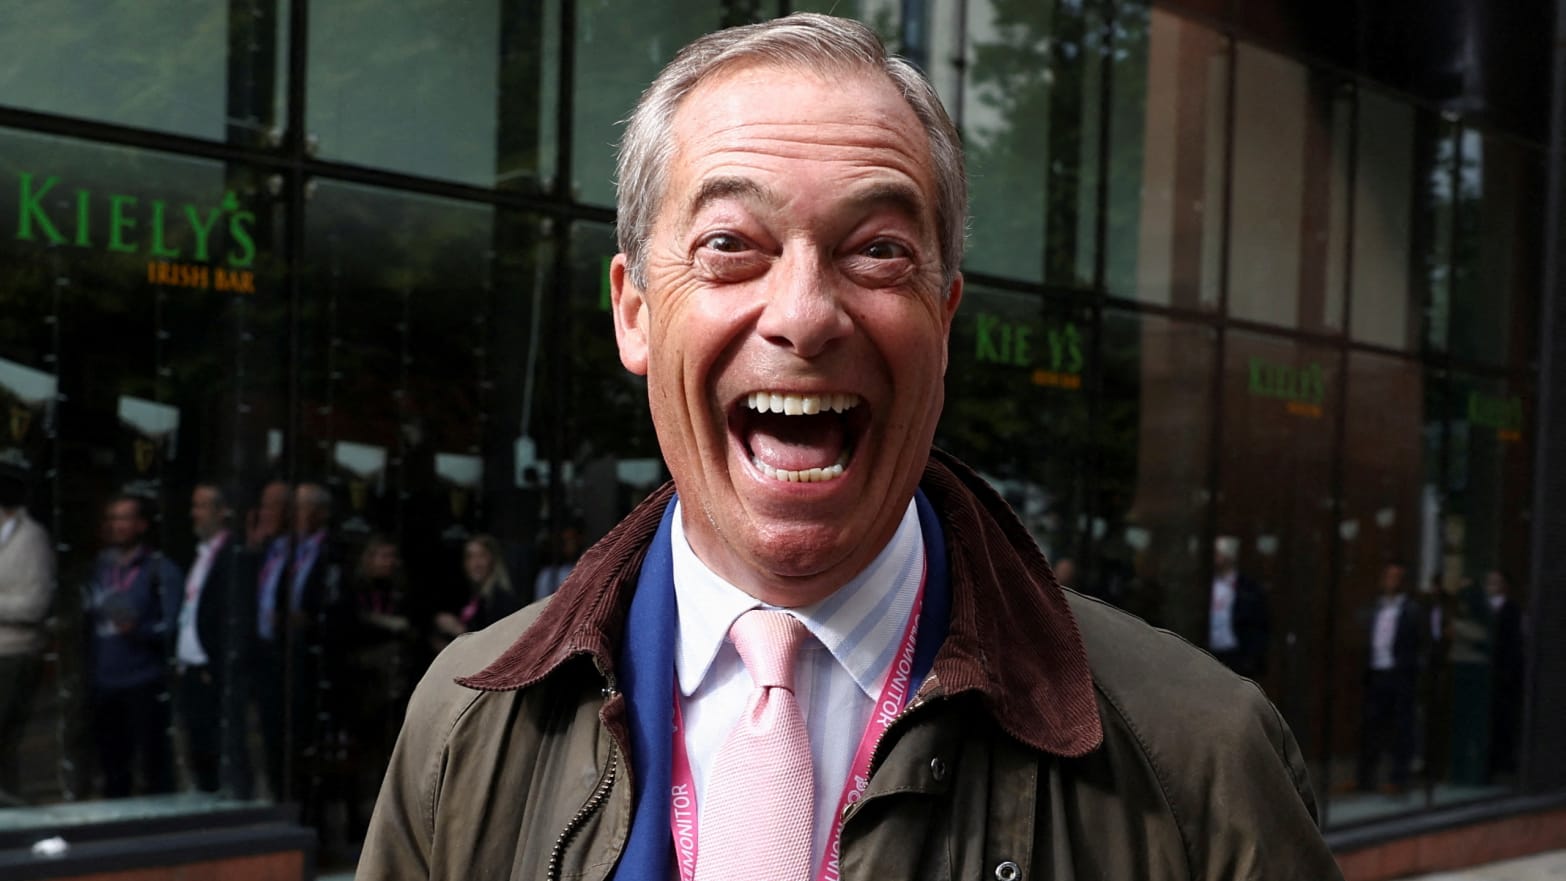 Nigel Farage has announced he will stand in the U.K. general election.